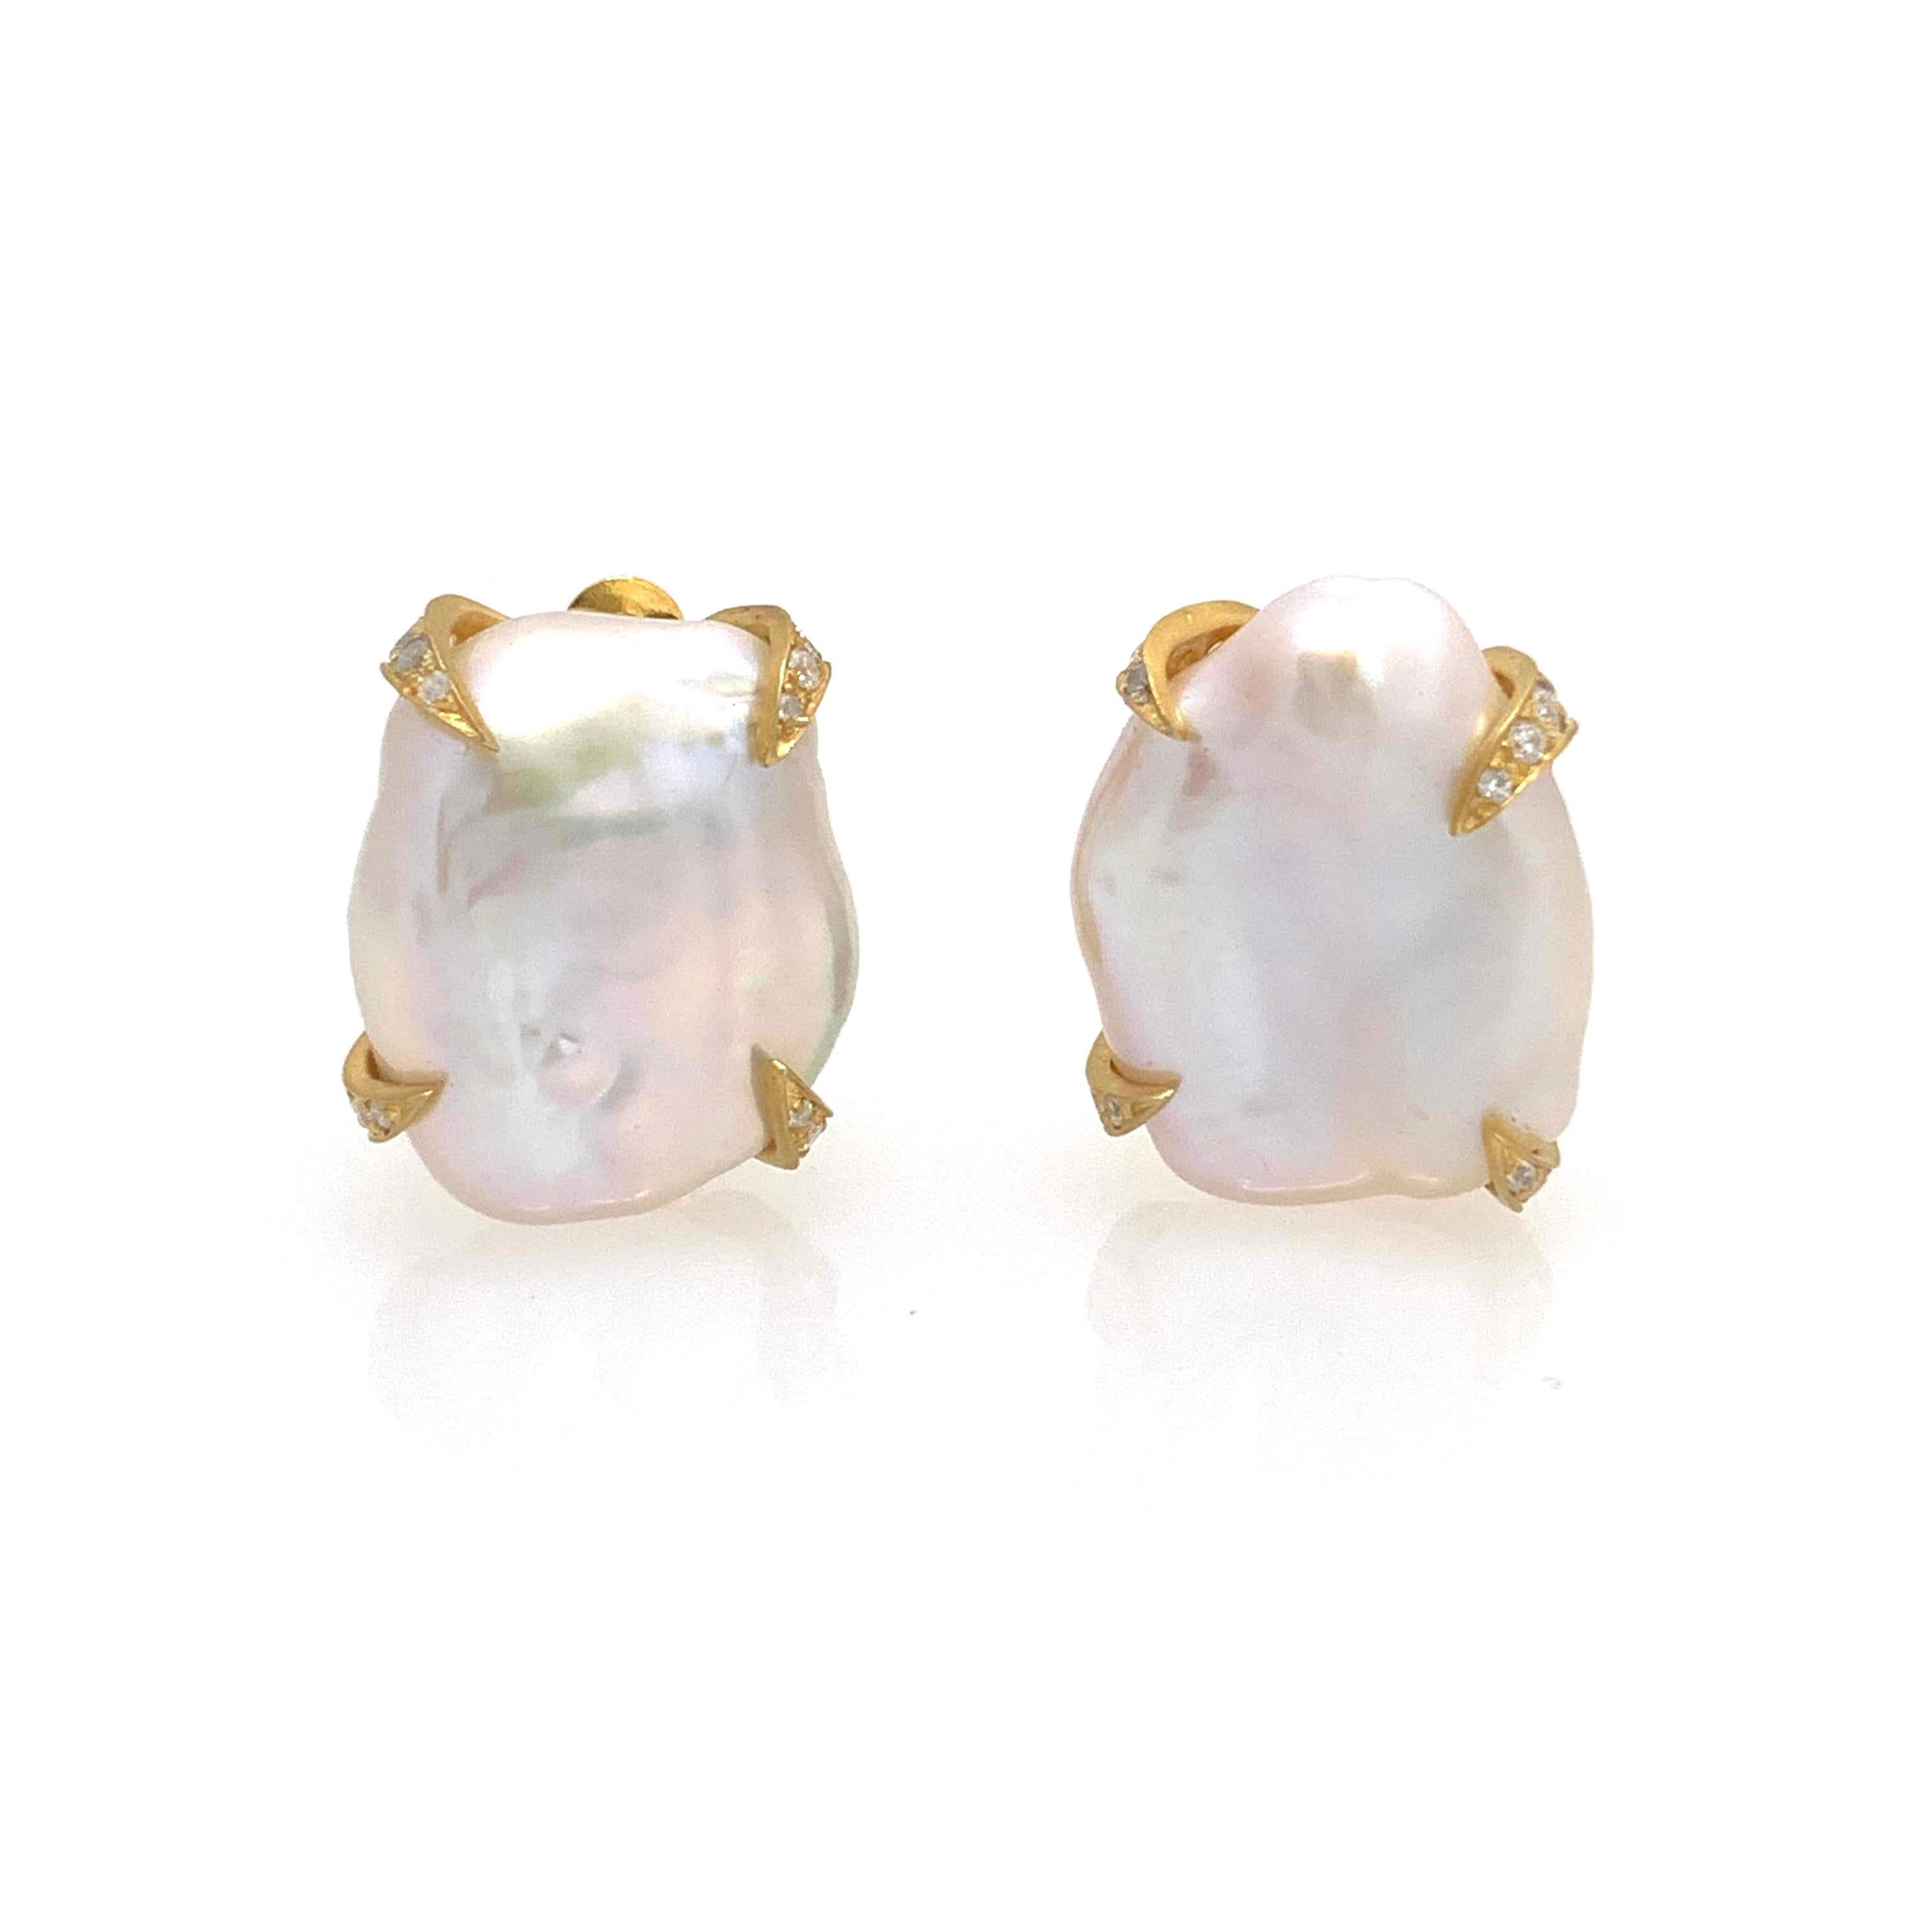 Beautiful pair of large lustrous white flat baroque pearl earrings. The pair measures 18mm width and 22mm height, adorned with round simulated diamonds, all handset in 18k yellow gold vermeil over sterling silver. Large and comfortable clip back